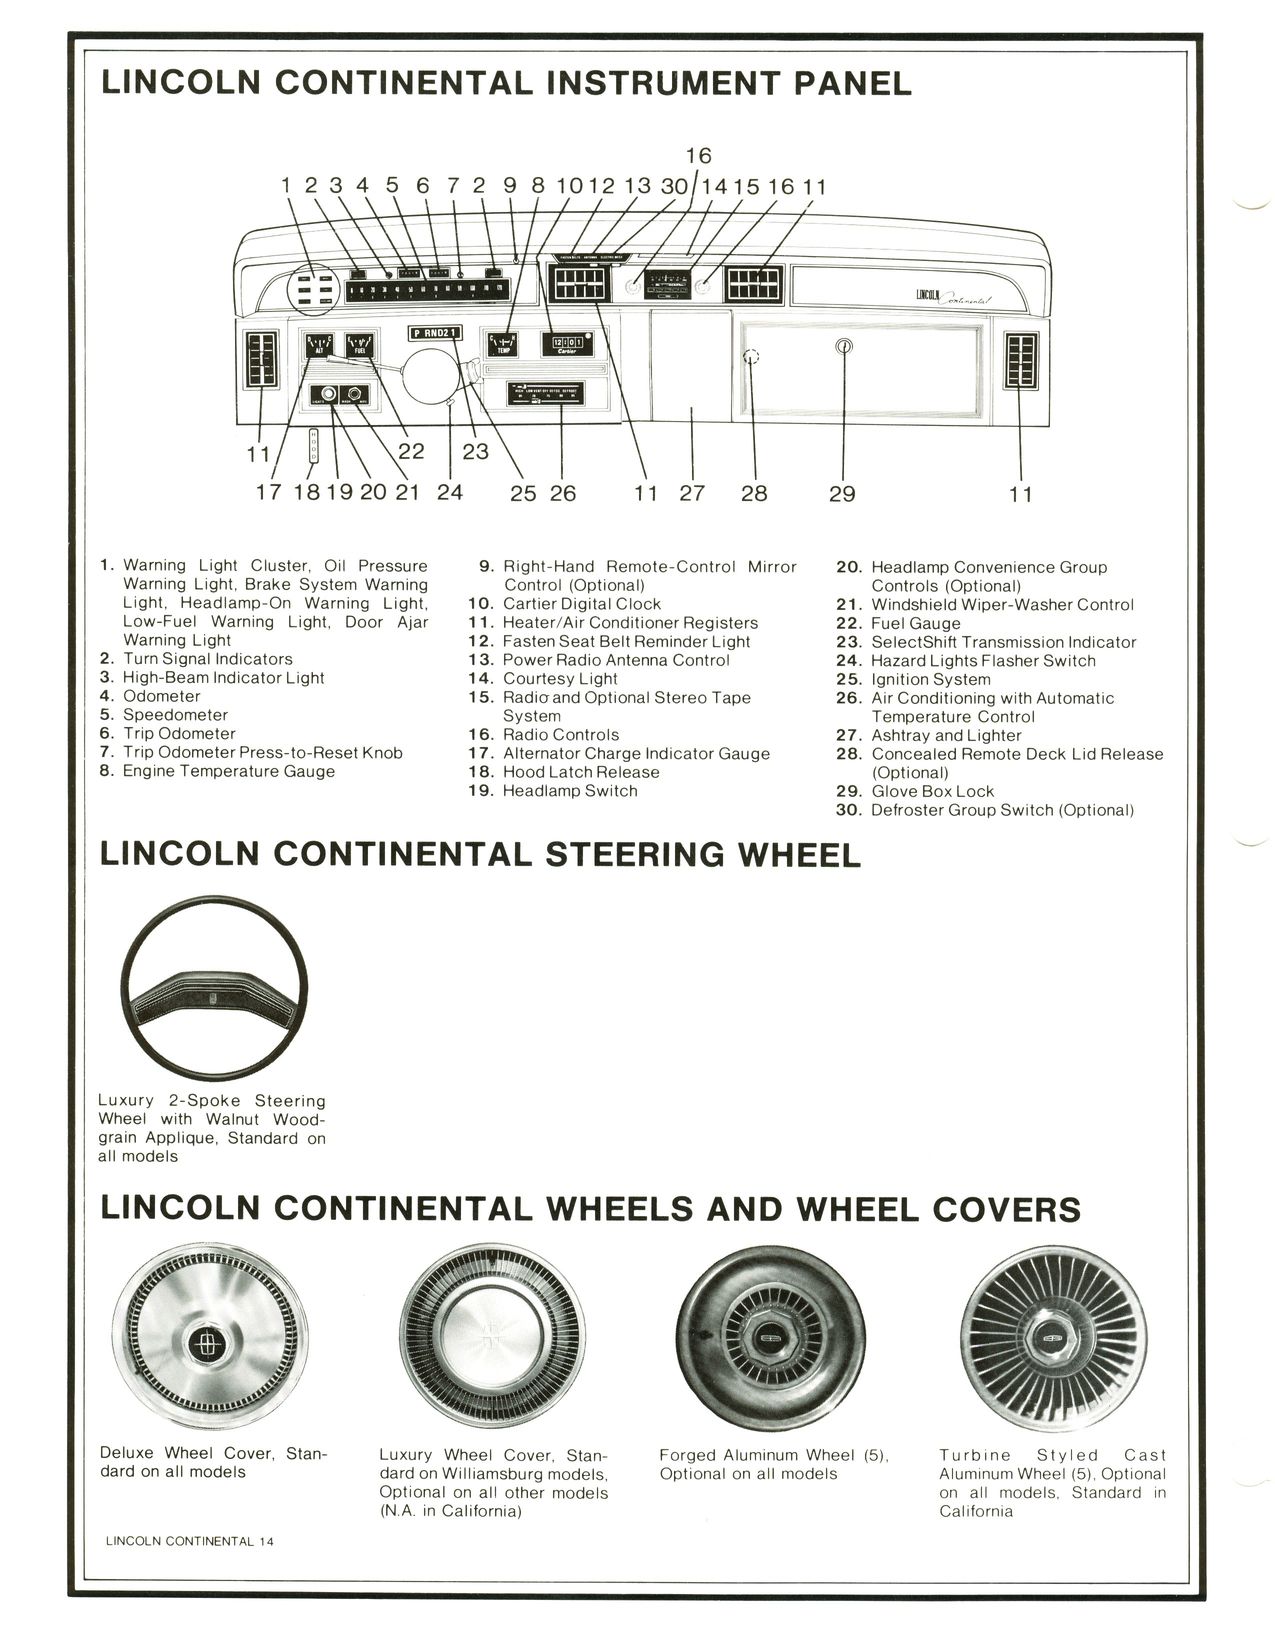 1977 Continental Product Facts Book-2-14